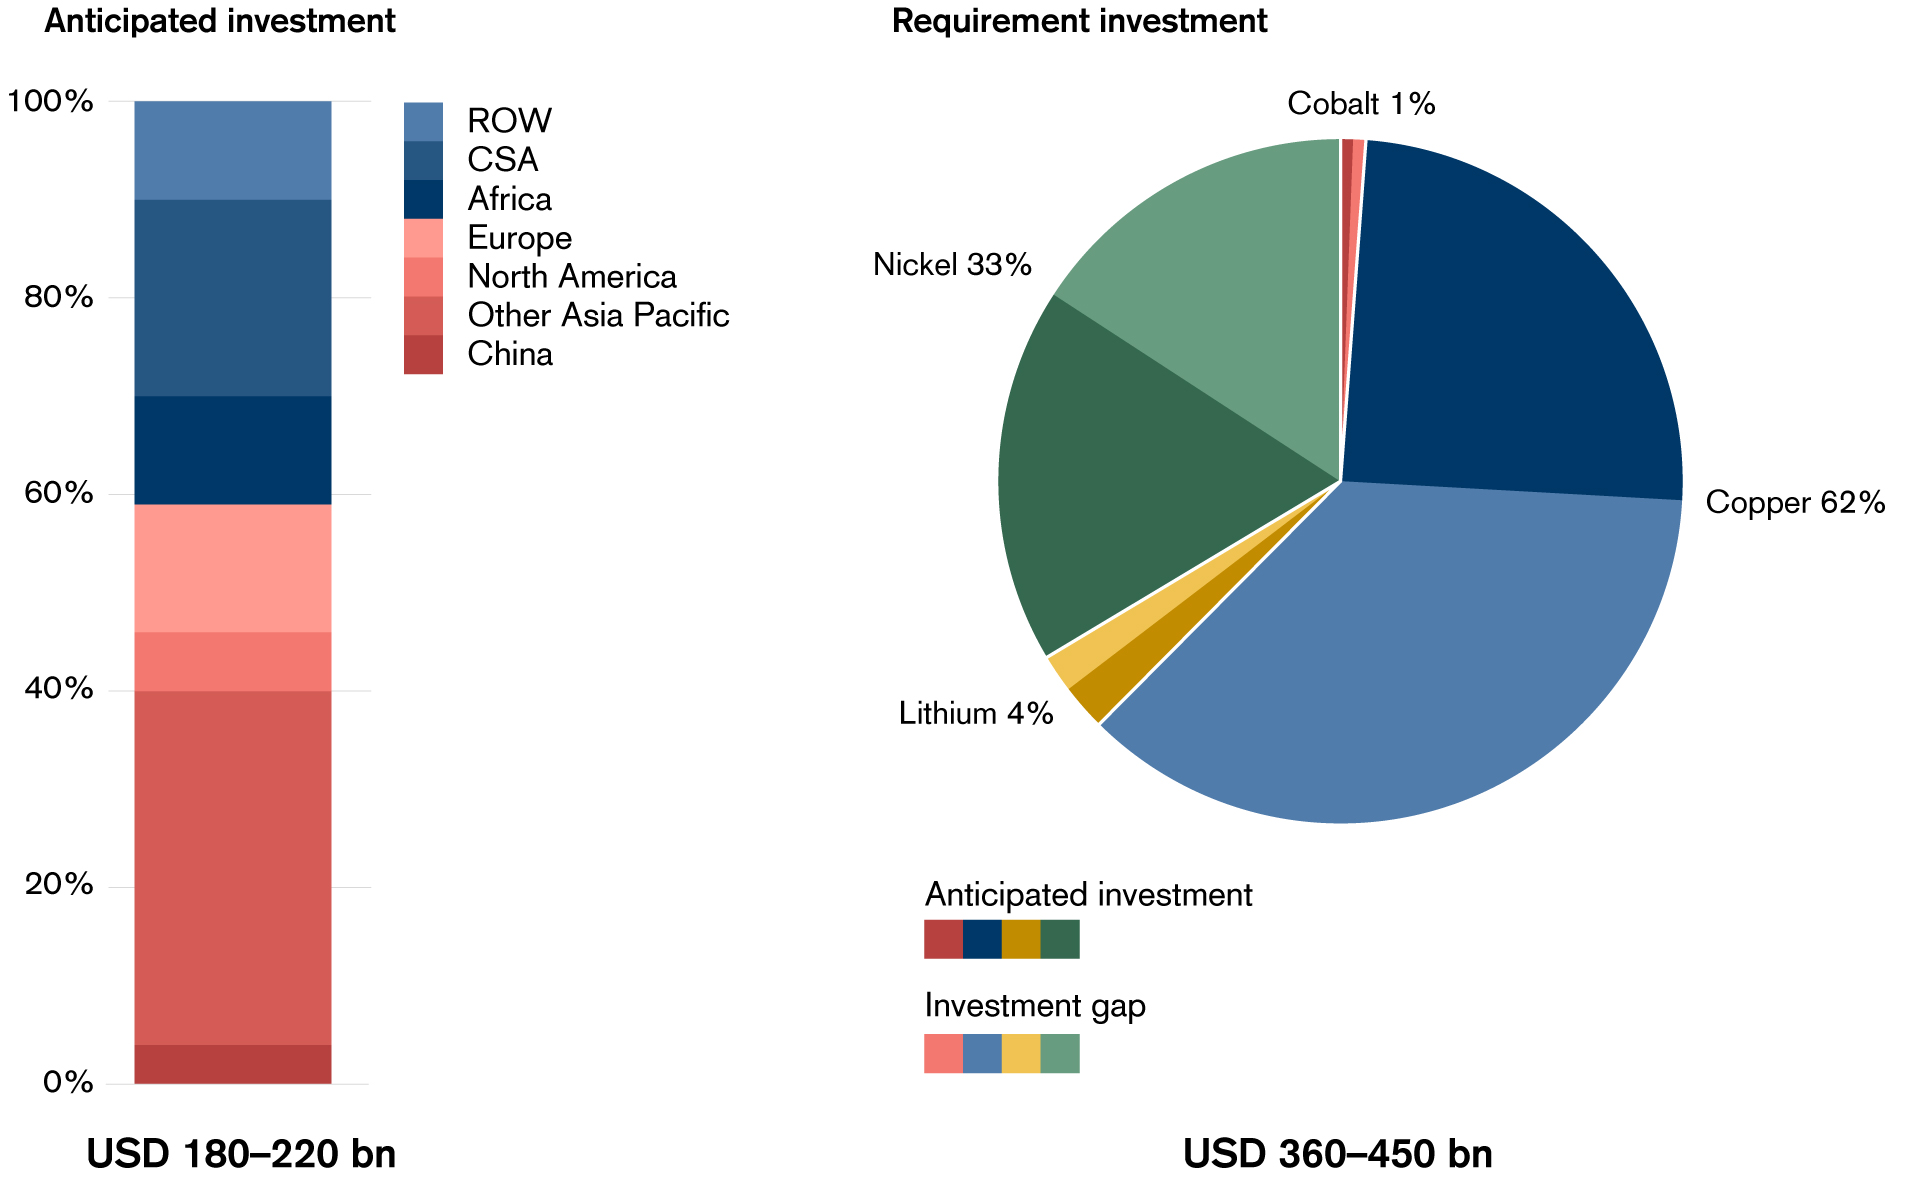 Figure 3: Anticipated and required investment in mining critical minerals by region/country. Based on investments required to meet mineral demand between 2022 and 2030 in the IEA Net Zero Energy Scenario